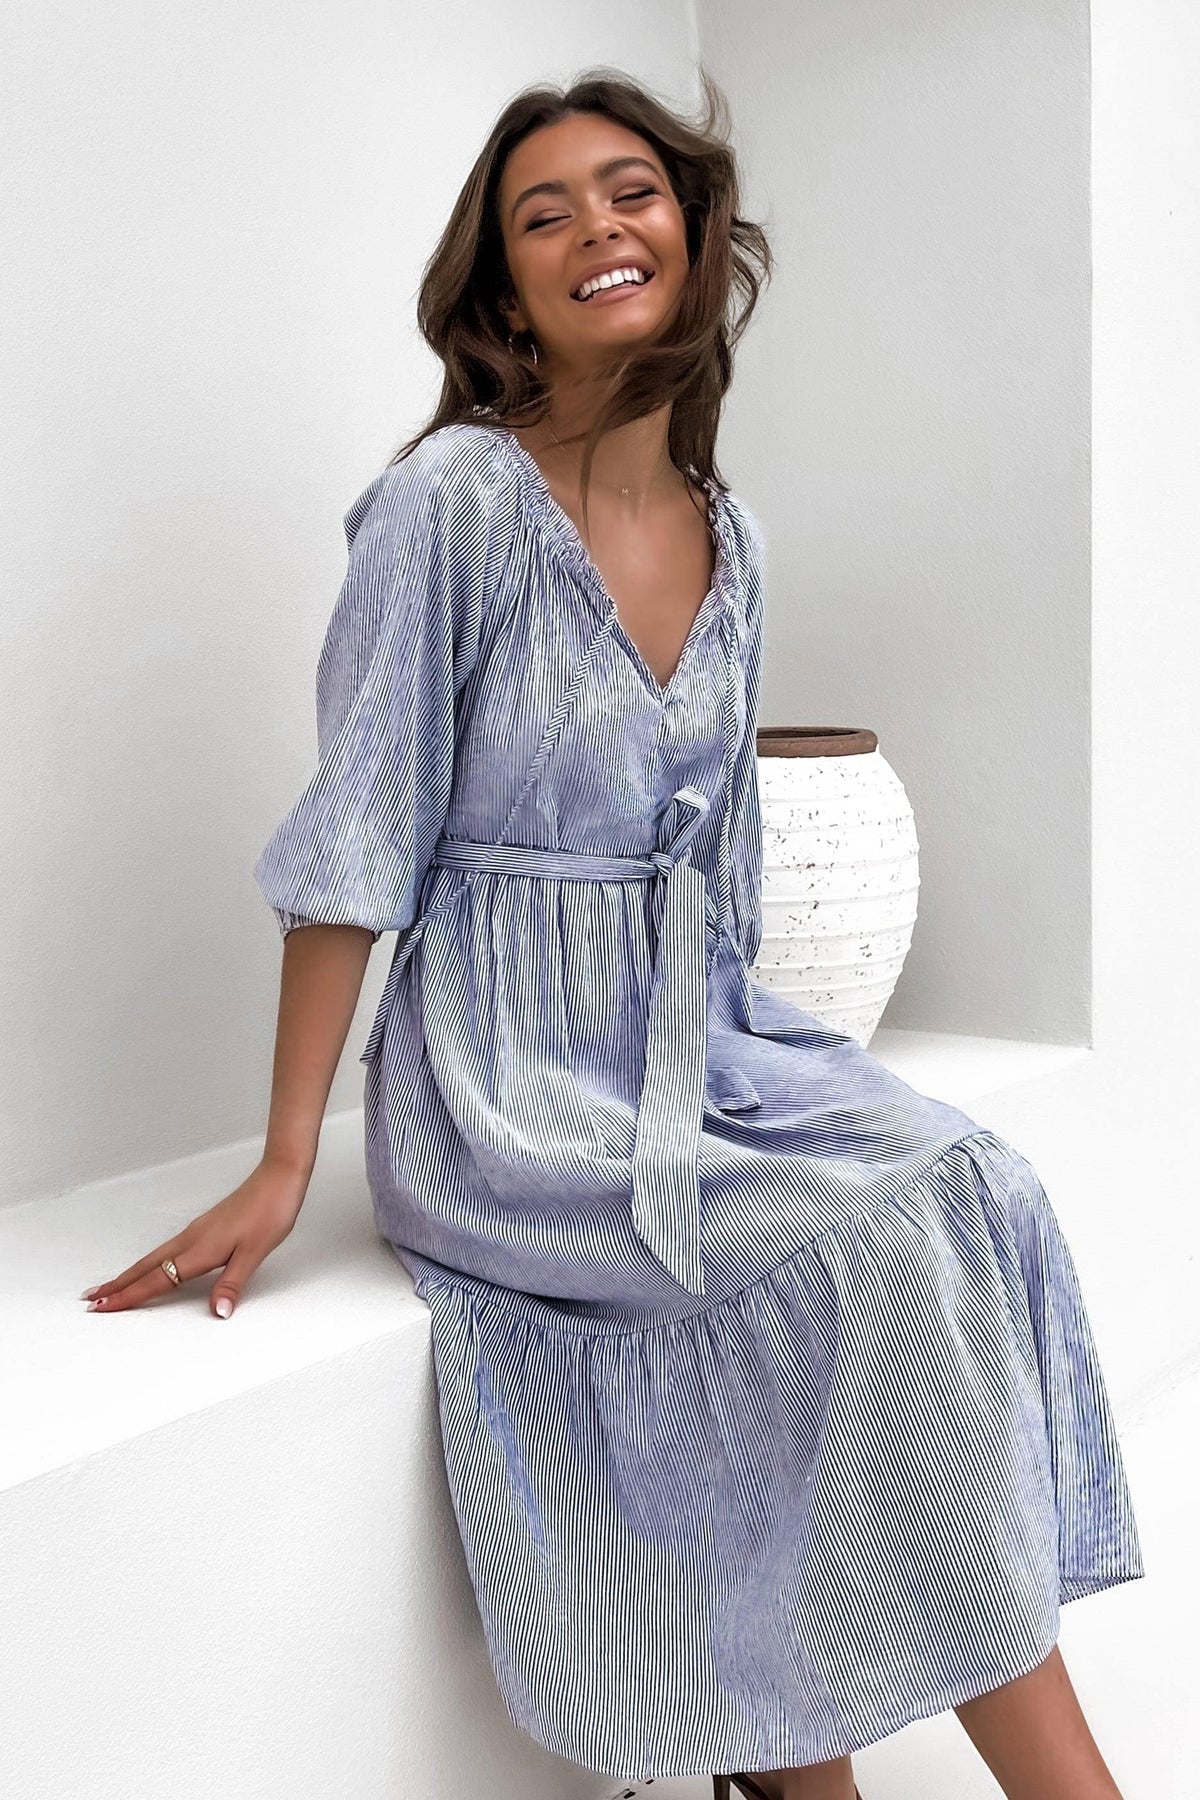 Tayia Dress, BAGGY, DRESS, DRESSES, LONG SLEEVE, MIDI DRESS, NEW ARRIVALS, PIN STRIPE, Sale, WAIST TIE, Tayia Dress only $61.00 @ MISHKAH ONLINE FASHION BOUTIQUE, Shop The Latest Women&#39;s Dresses - Our New Tayia Dress is only $61.00, @ MISHKAH ONLINE FASHION BOUTIQUE-MISHKAH